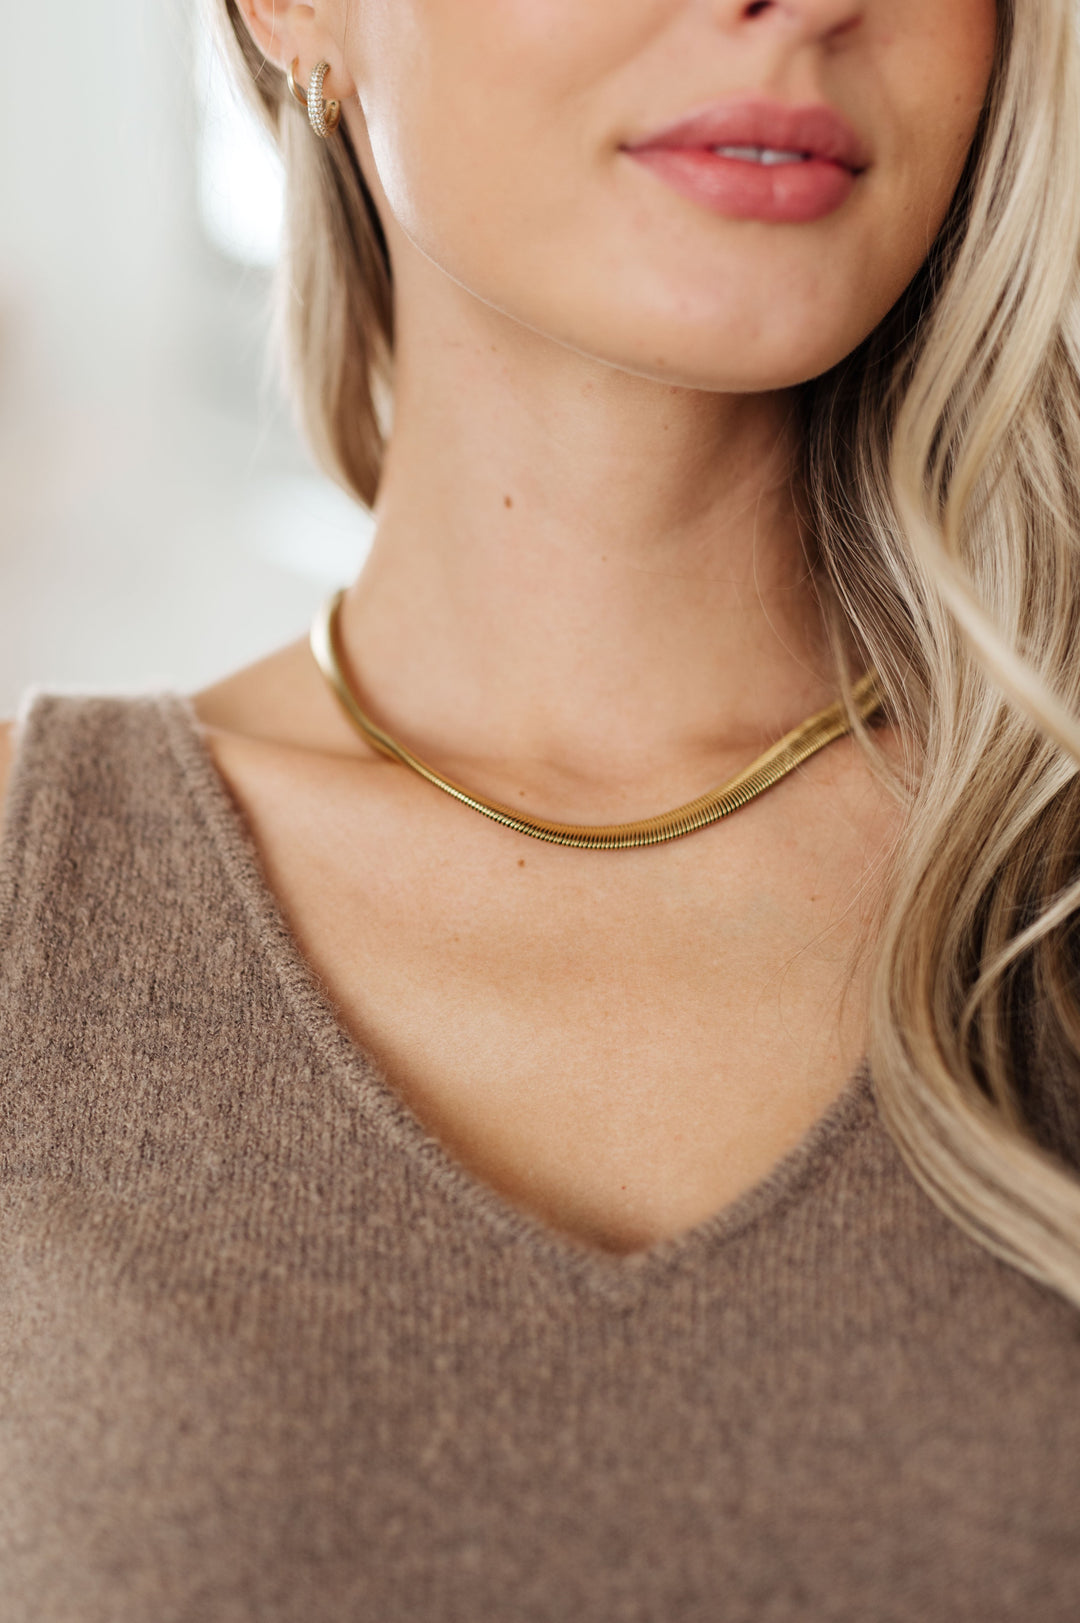 Enlighten Me Gold Plated Chain Necklace-Necklaces-Inspired by Justeen-Women's Clothing Boutique in Chicago, Illinois